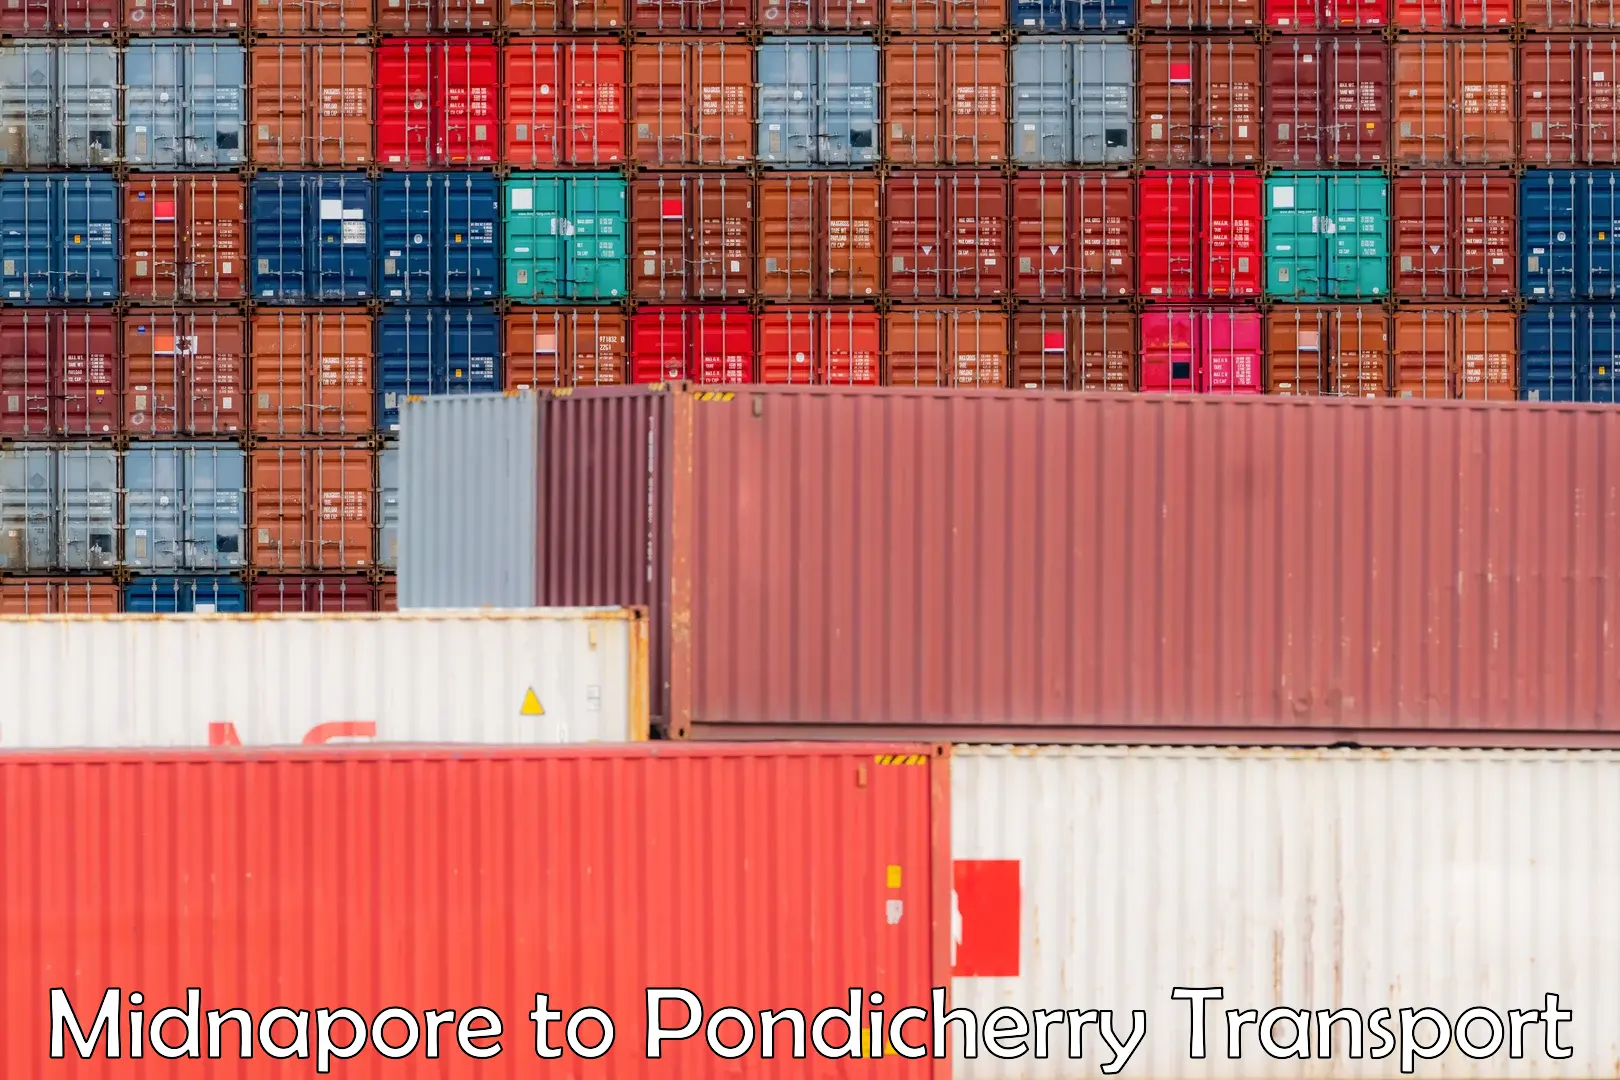 Daily parcel service transport Midnapore to Pondicherry